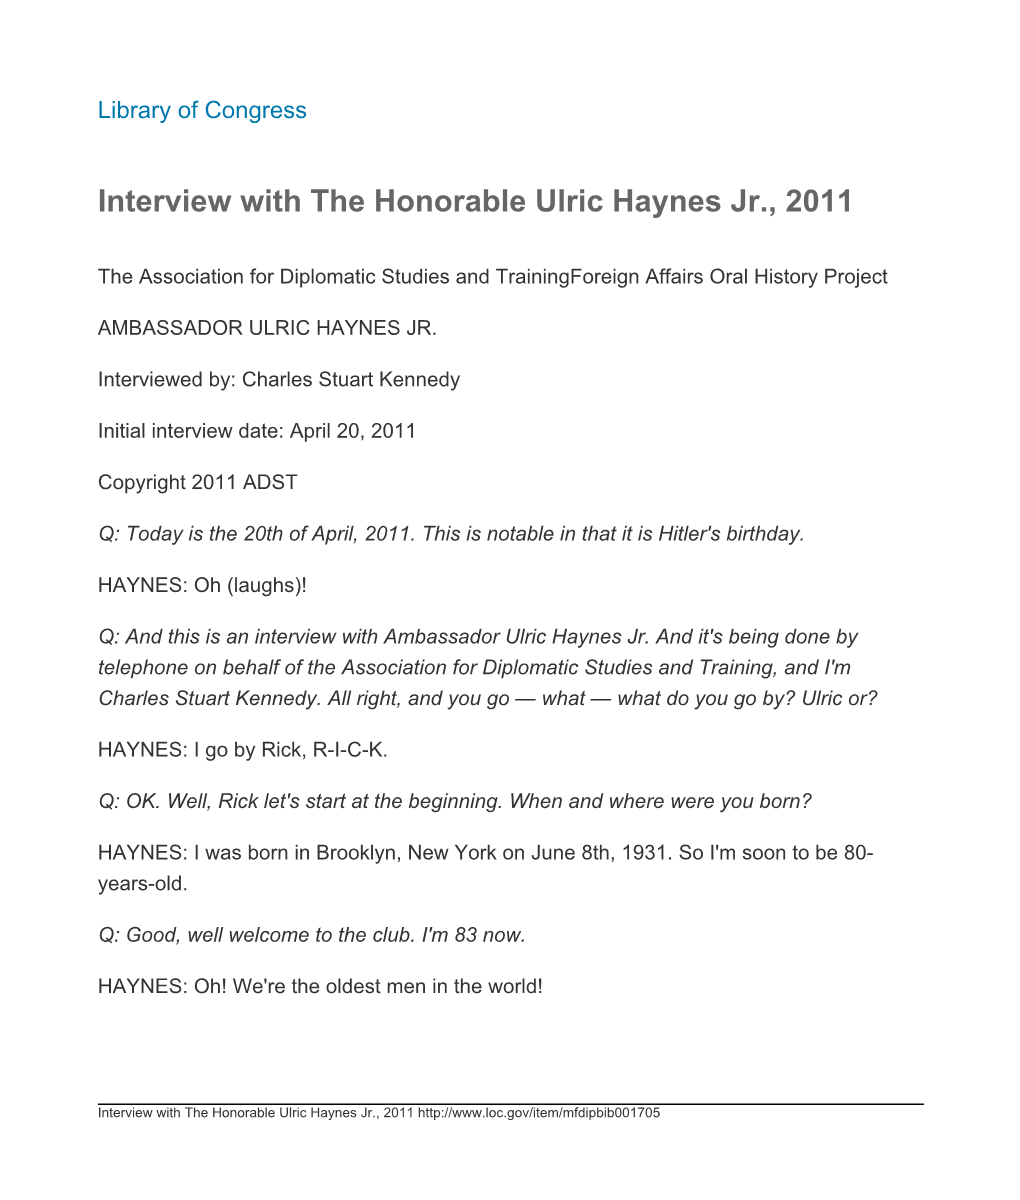 Interview with the Honorable Ulric Haynes Jr., 2011